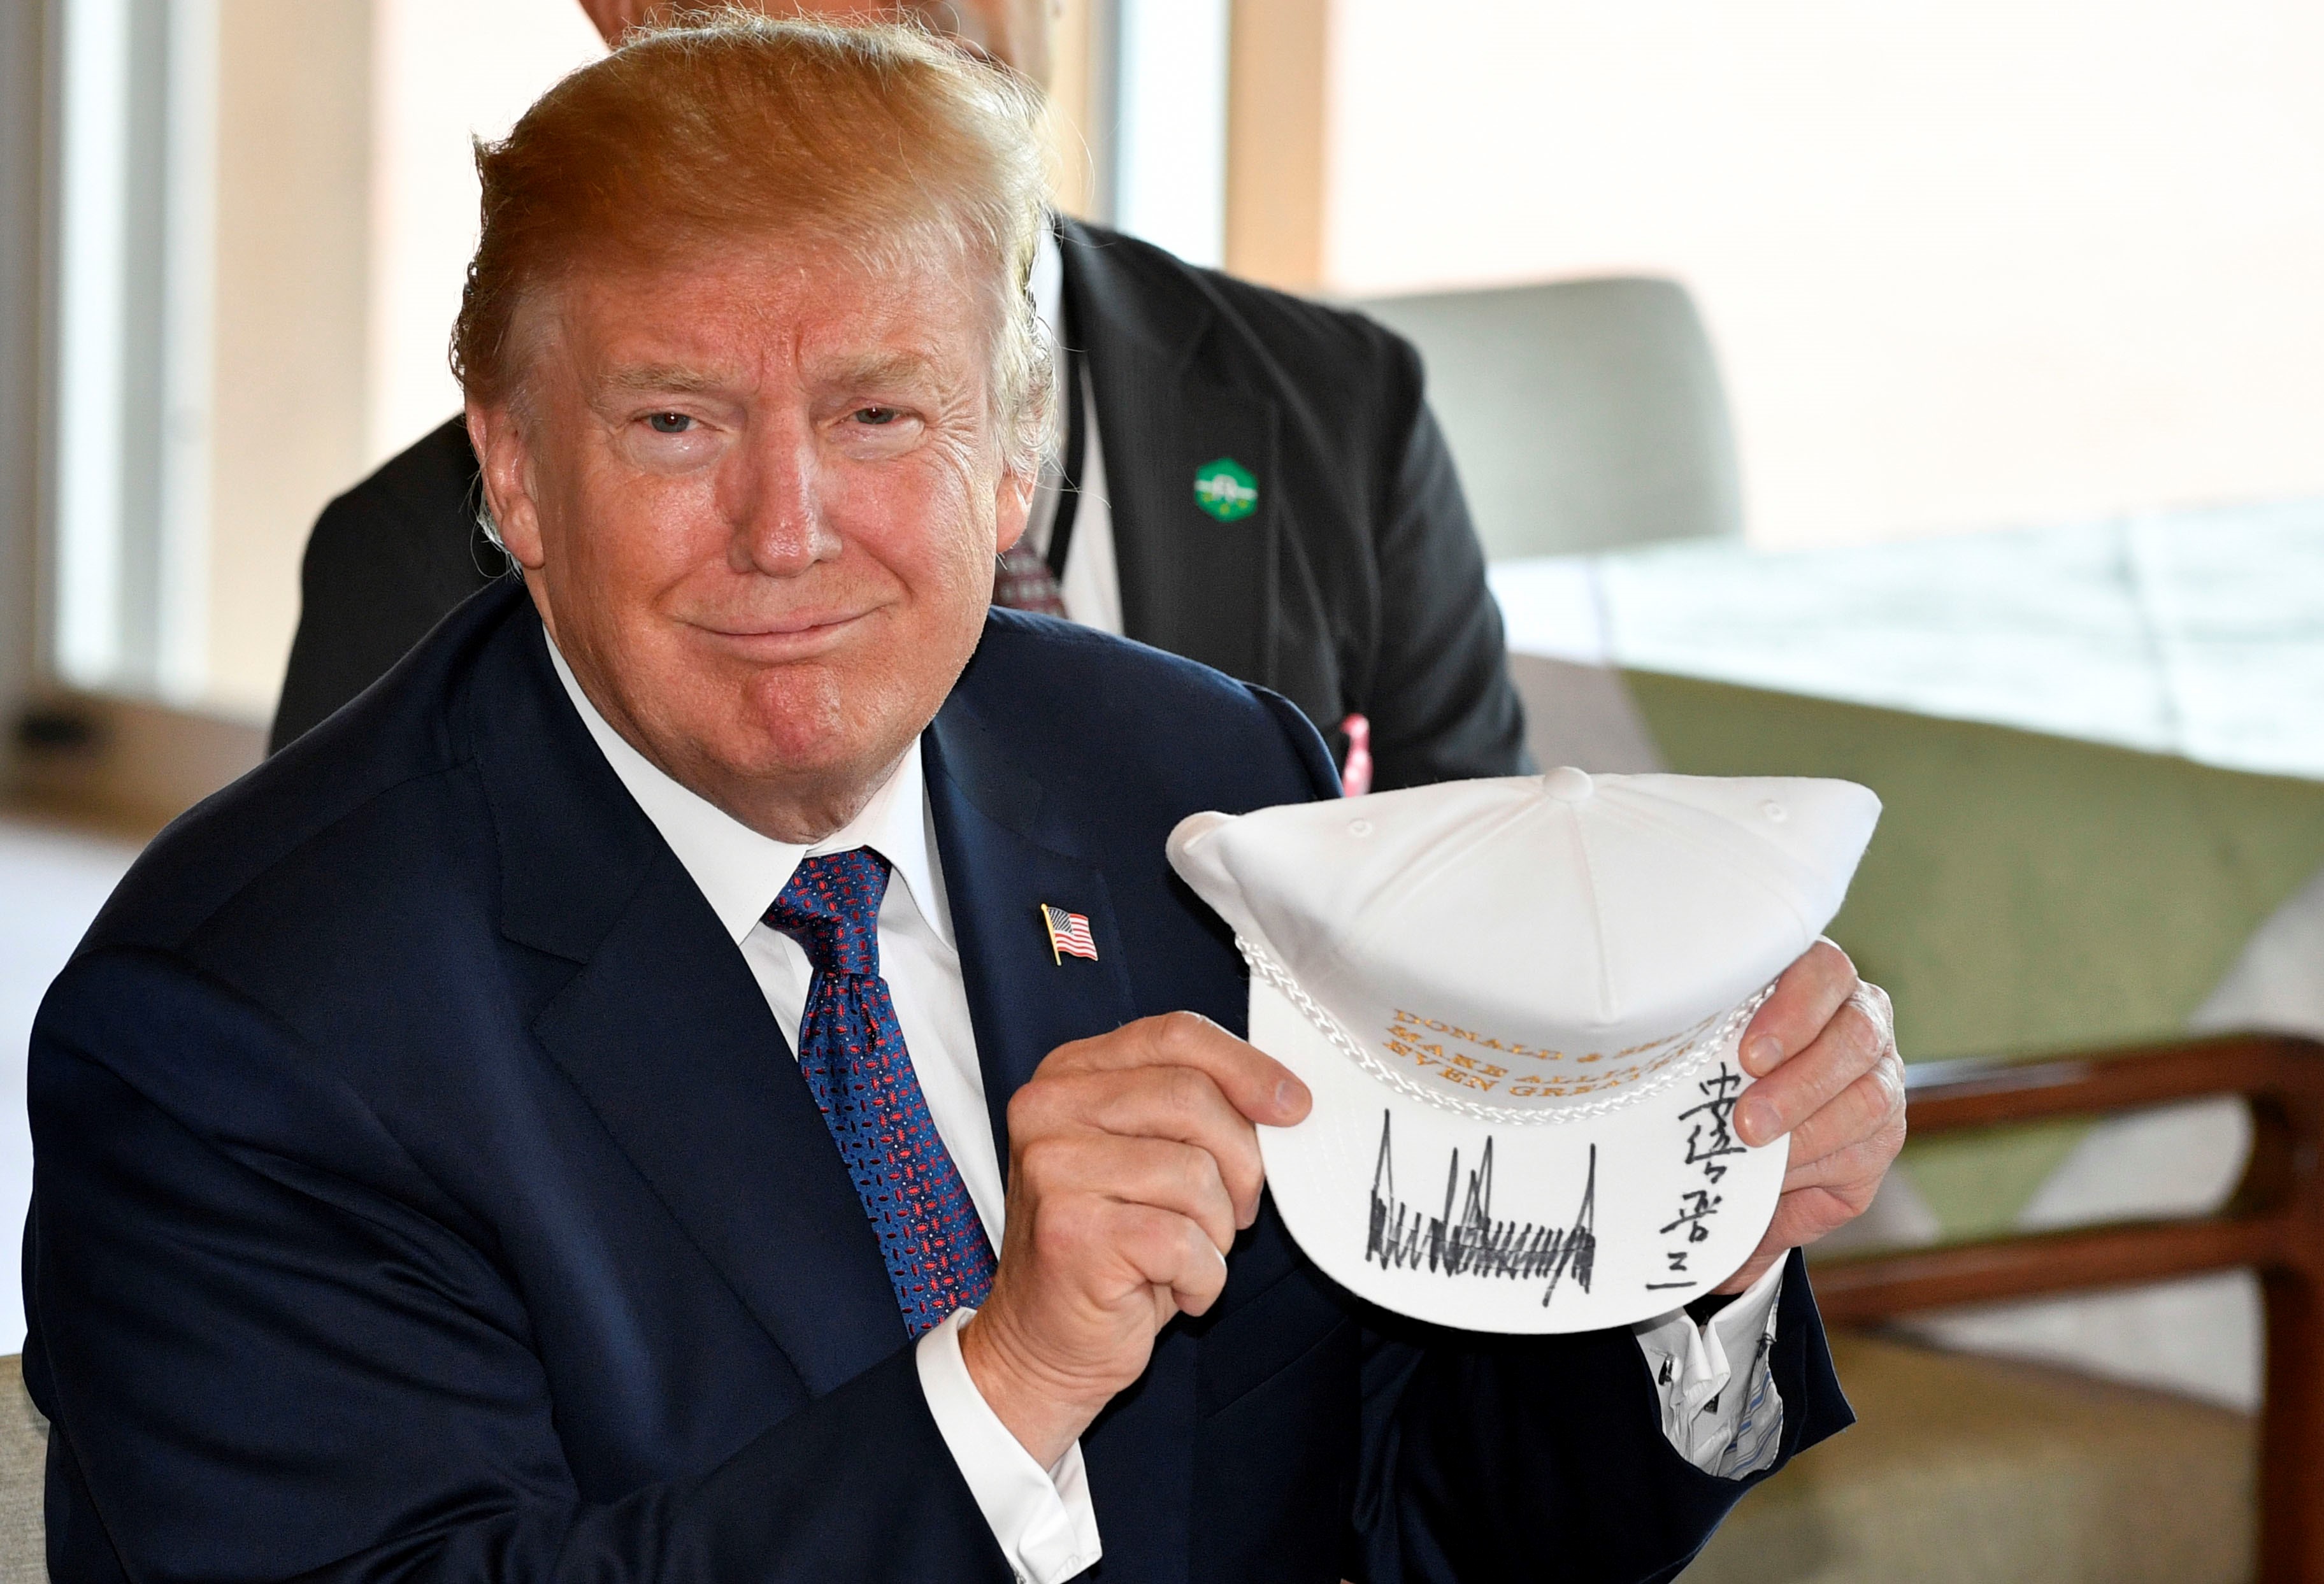 President Donald Trump shows off a signed hat during his meeting with Japanese Prime Minister Shinzo Abe at the Kasumigaseki Country Club on Nov. 05, 2017. (Franck Robichon—Anadolu Agency/Getty Images)